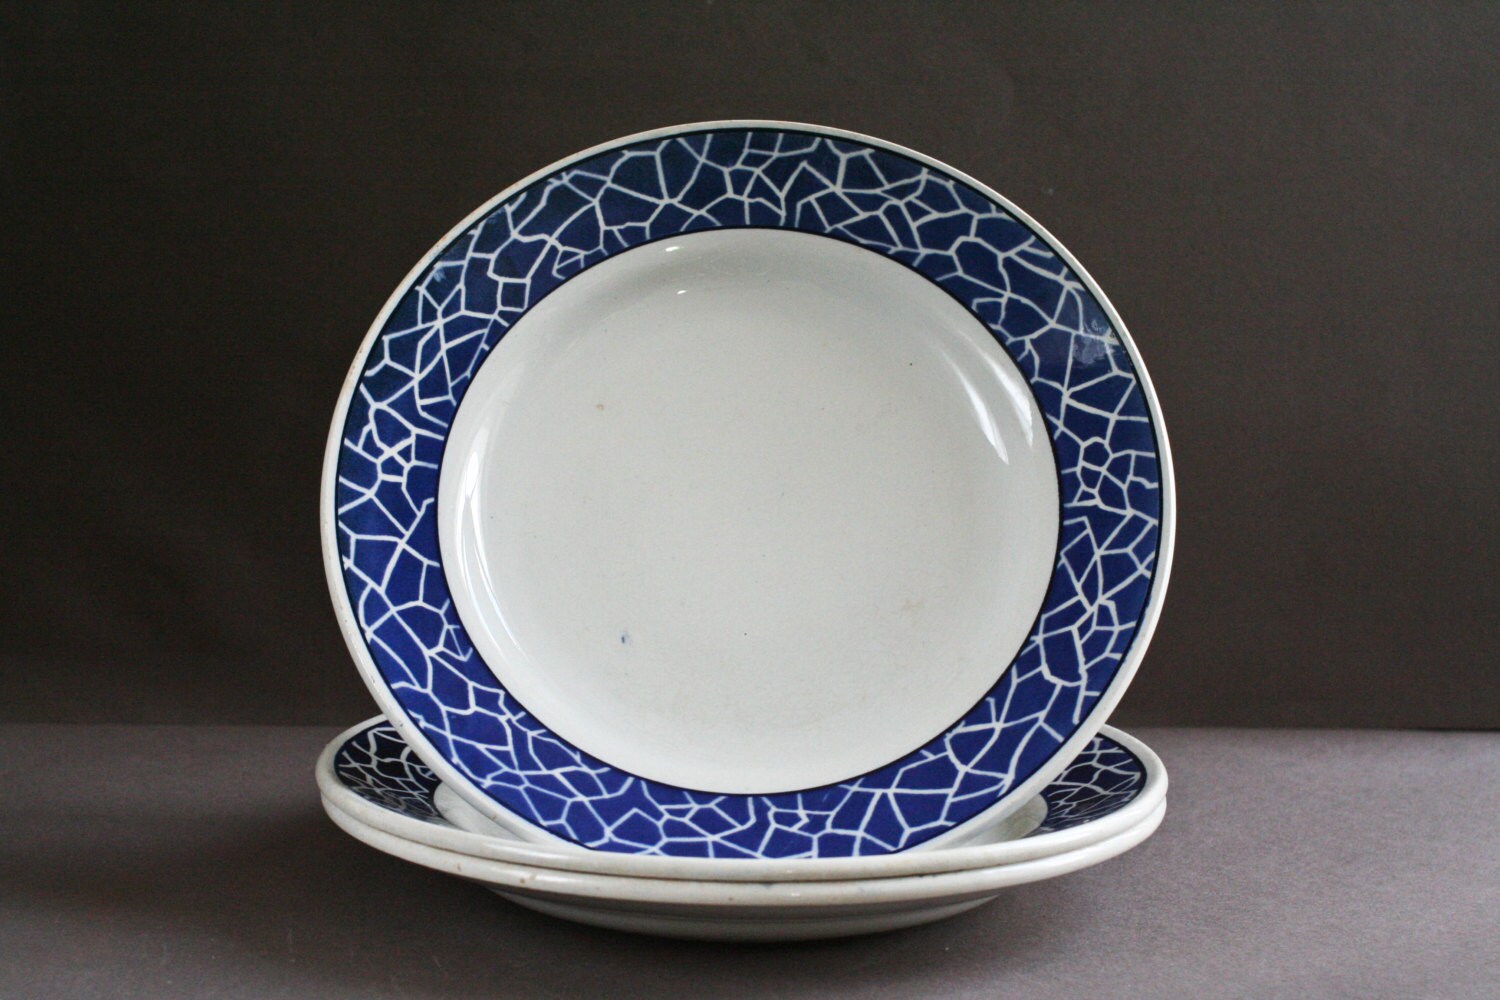 Three Porcelaine French Plates- Blue & White - From L'amandinoise- Typical Decor